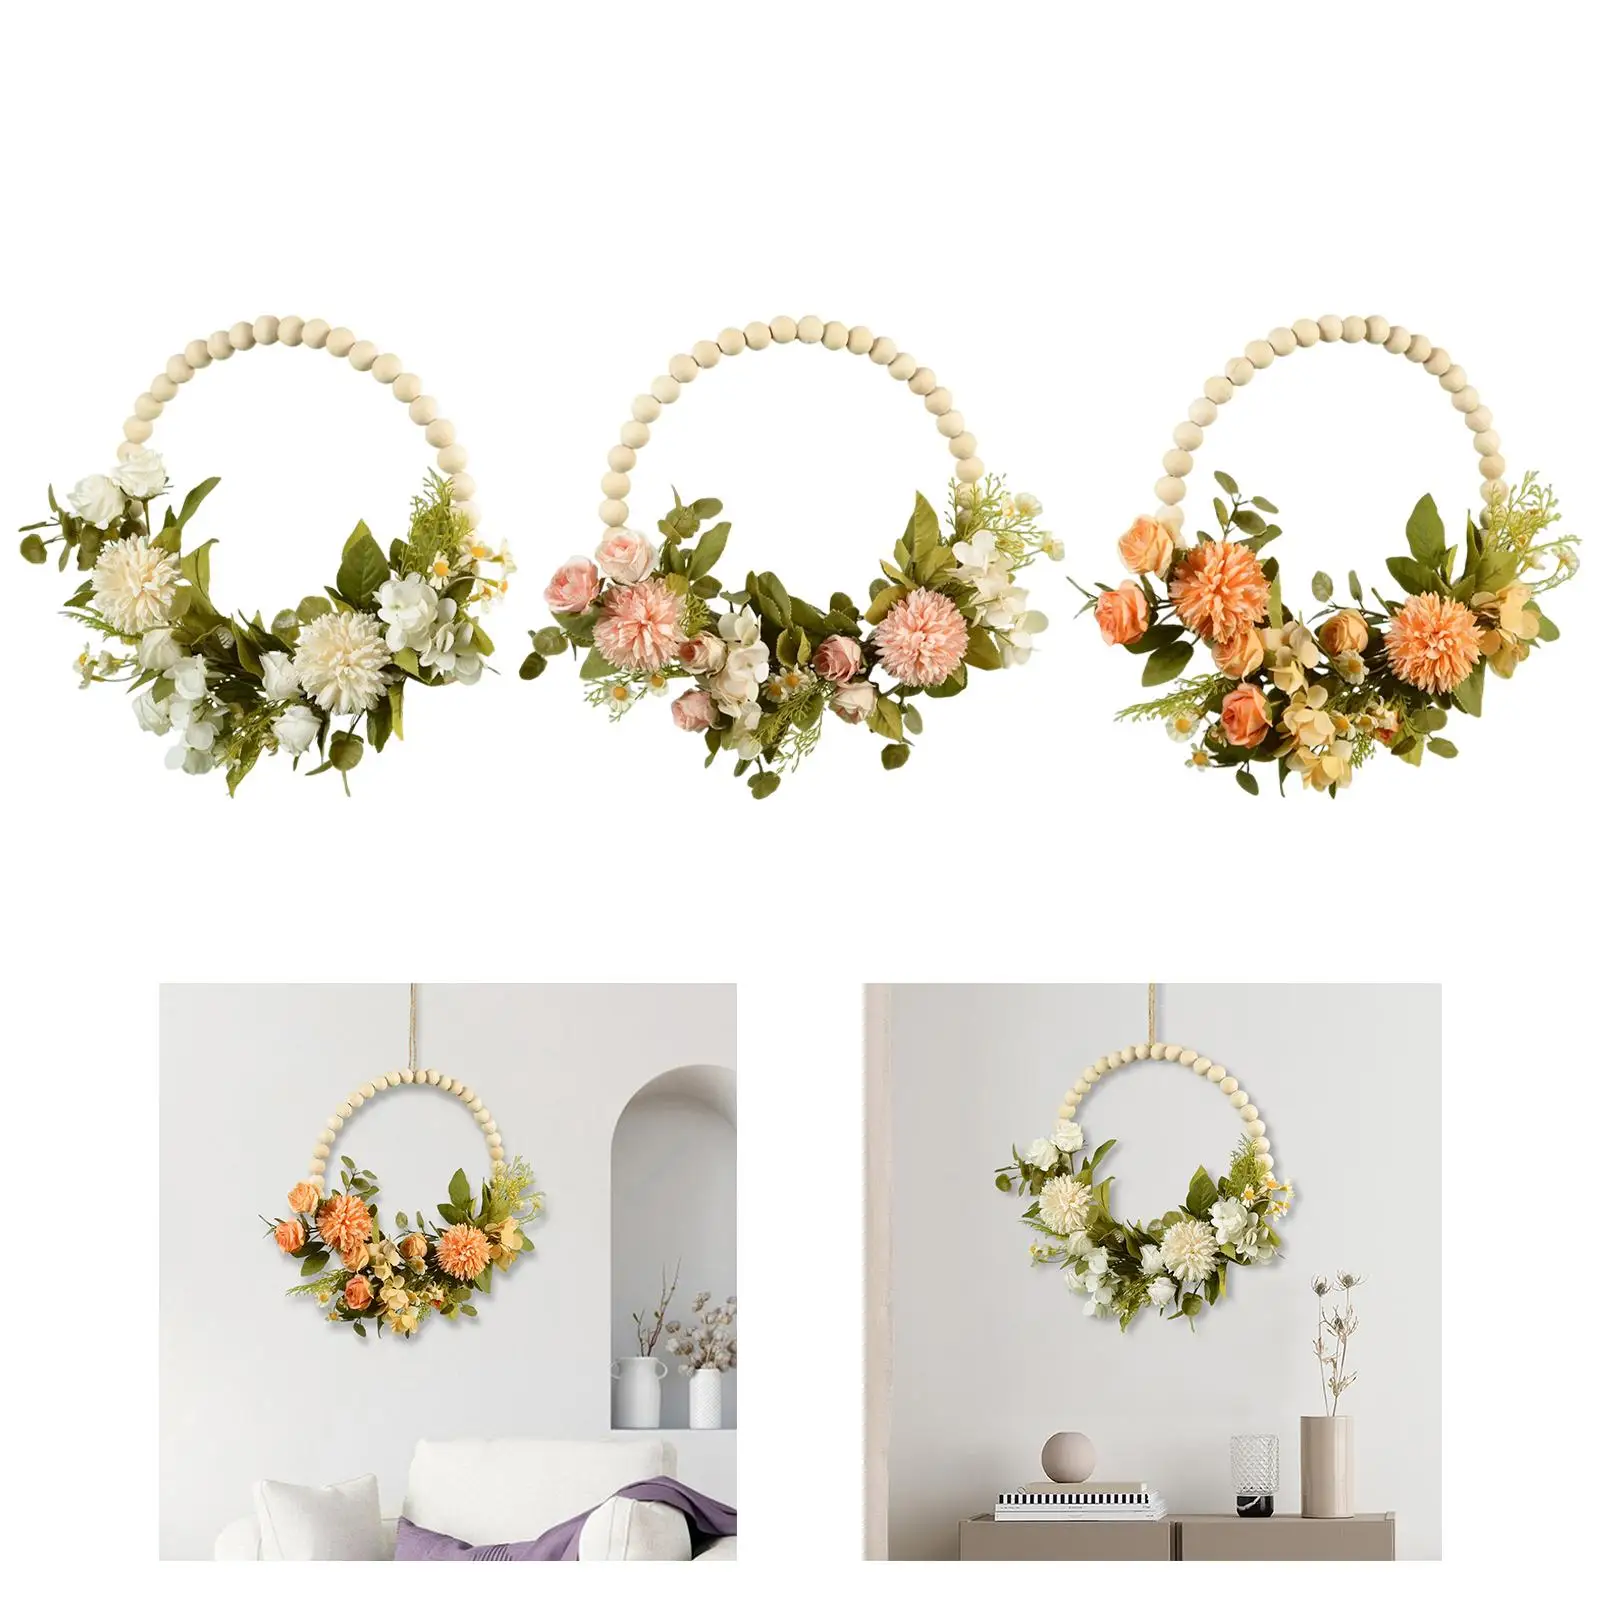 Artificial Flower Wreath Garland Wood Beads Hoop Wall Hanging Greenery Leaves for Indoor Farmhouse Fireplace Party Decor